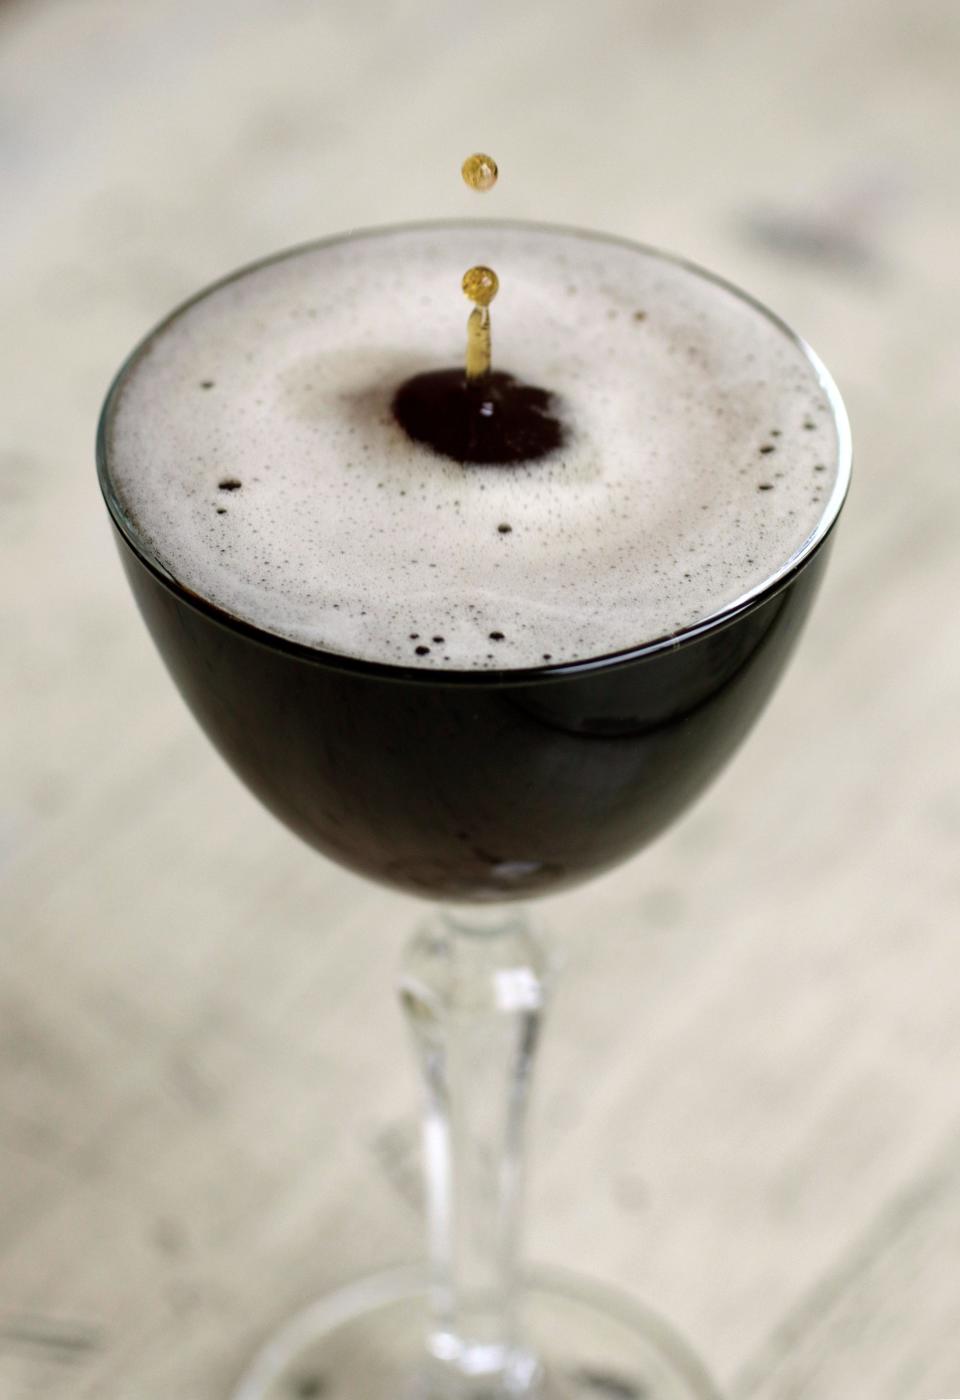 Espresso martinis are all the rage right now. If you want to make it a bonding experience, try the giant version at Wally's Wieners in Newport.